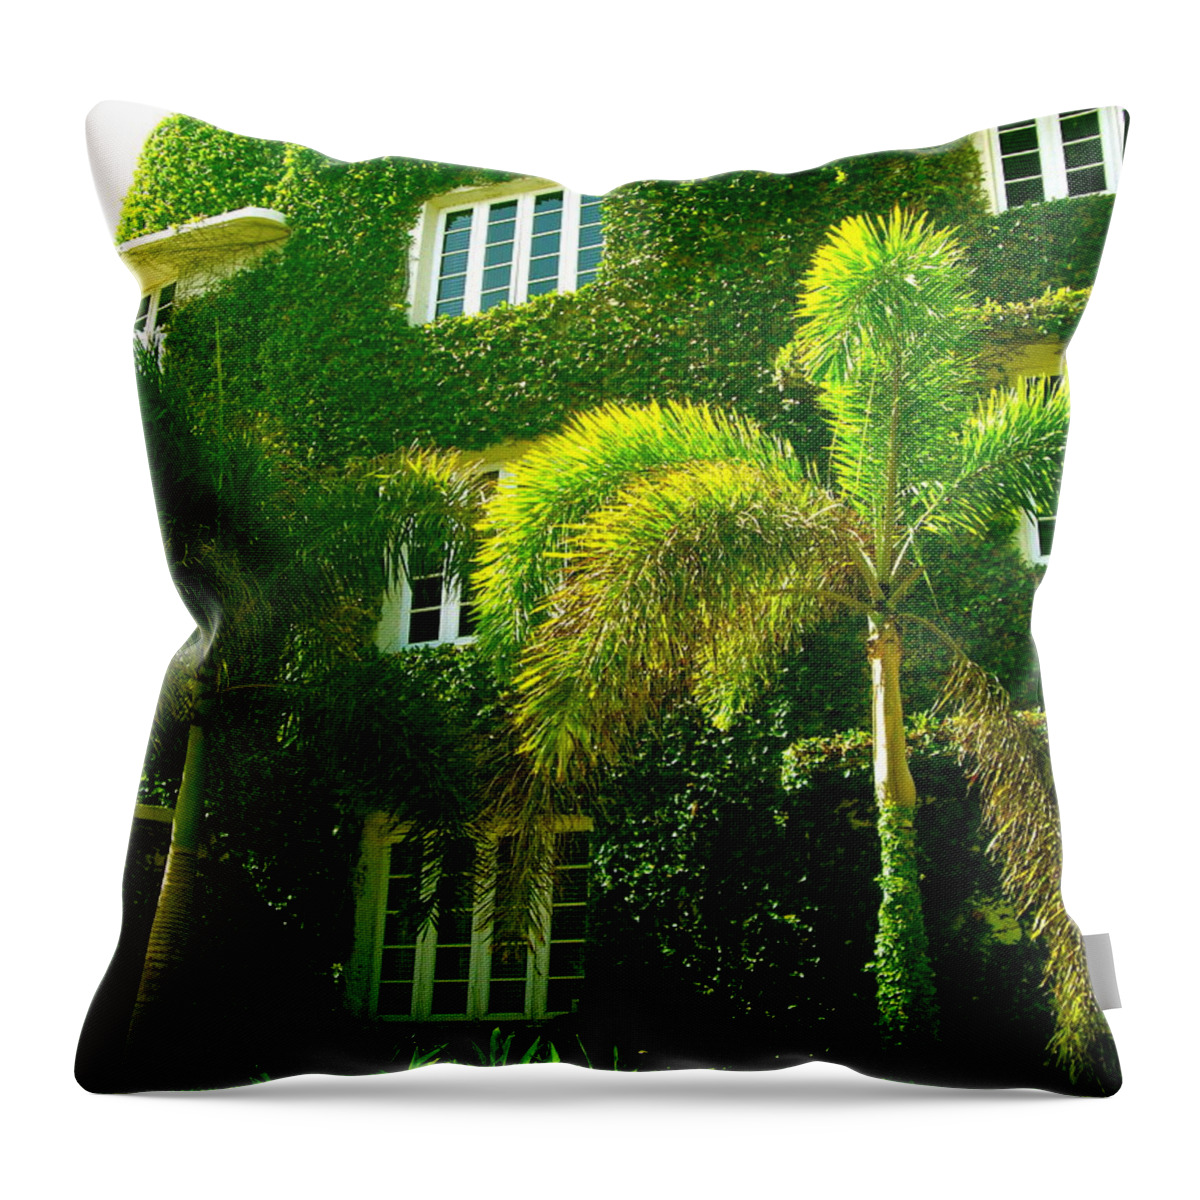 Ivy Prints Throw Pillow featuring the photograph Natural Ivy House by Monique Wegmueller